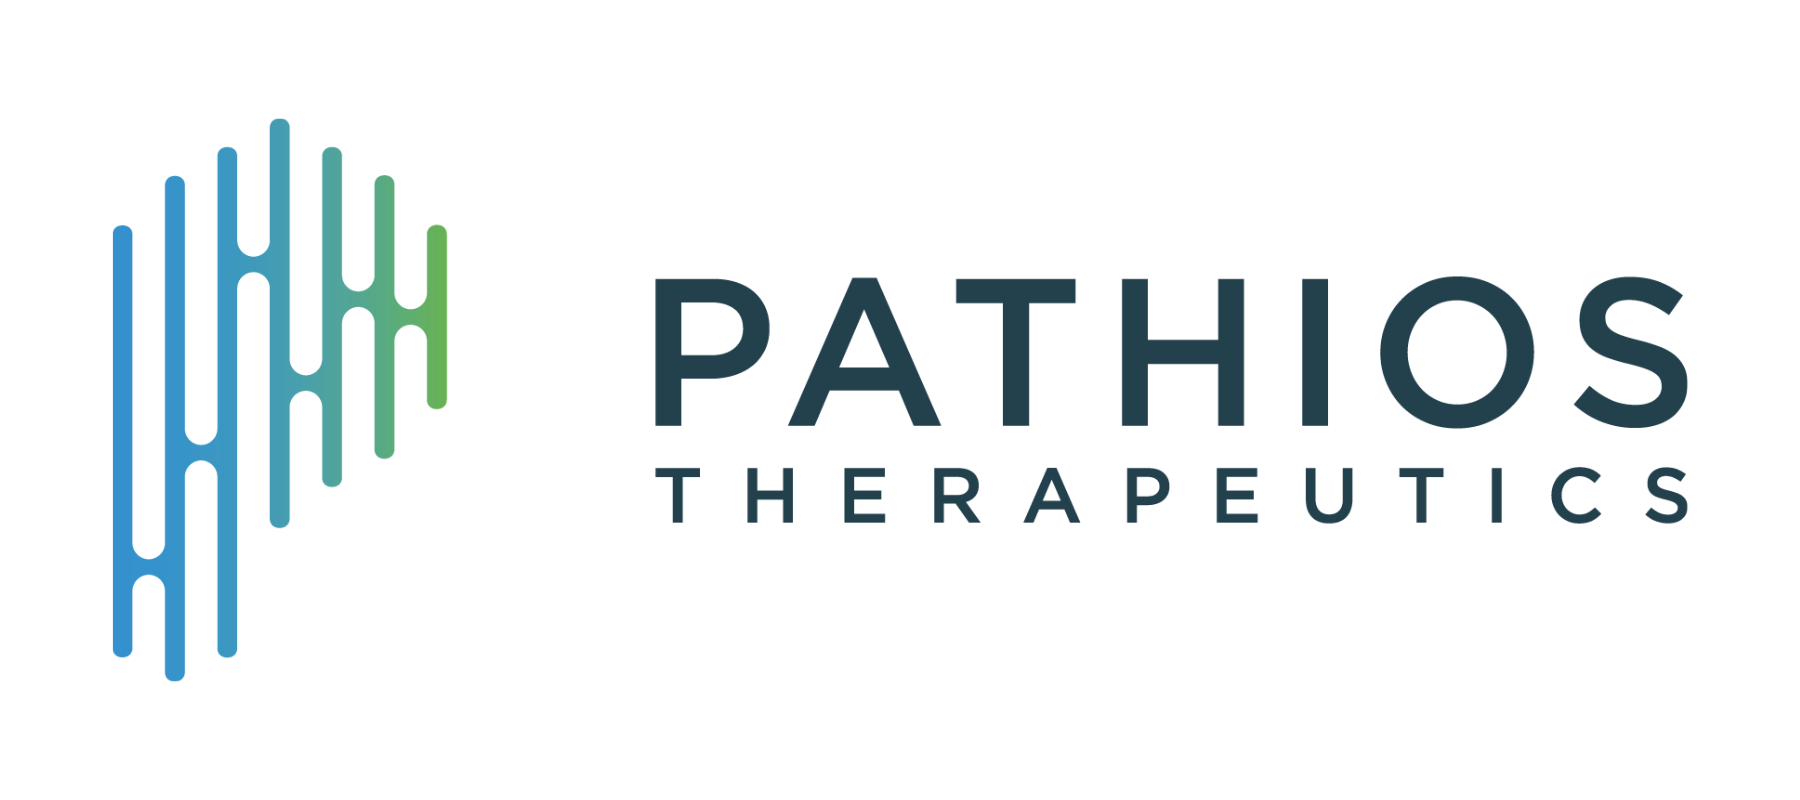 UK-based biotech startup Pathios Therapeutics raises €23.4m Series B to advance first-in-class immunotherapy approach into clinic